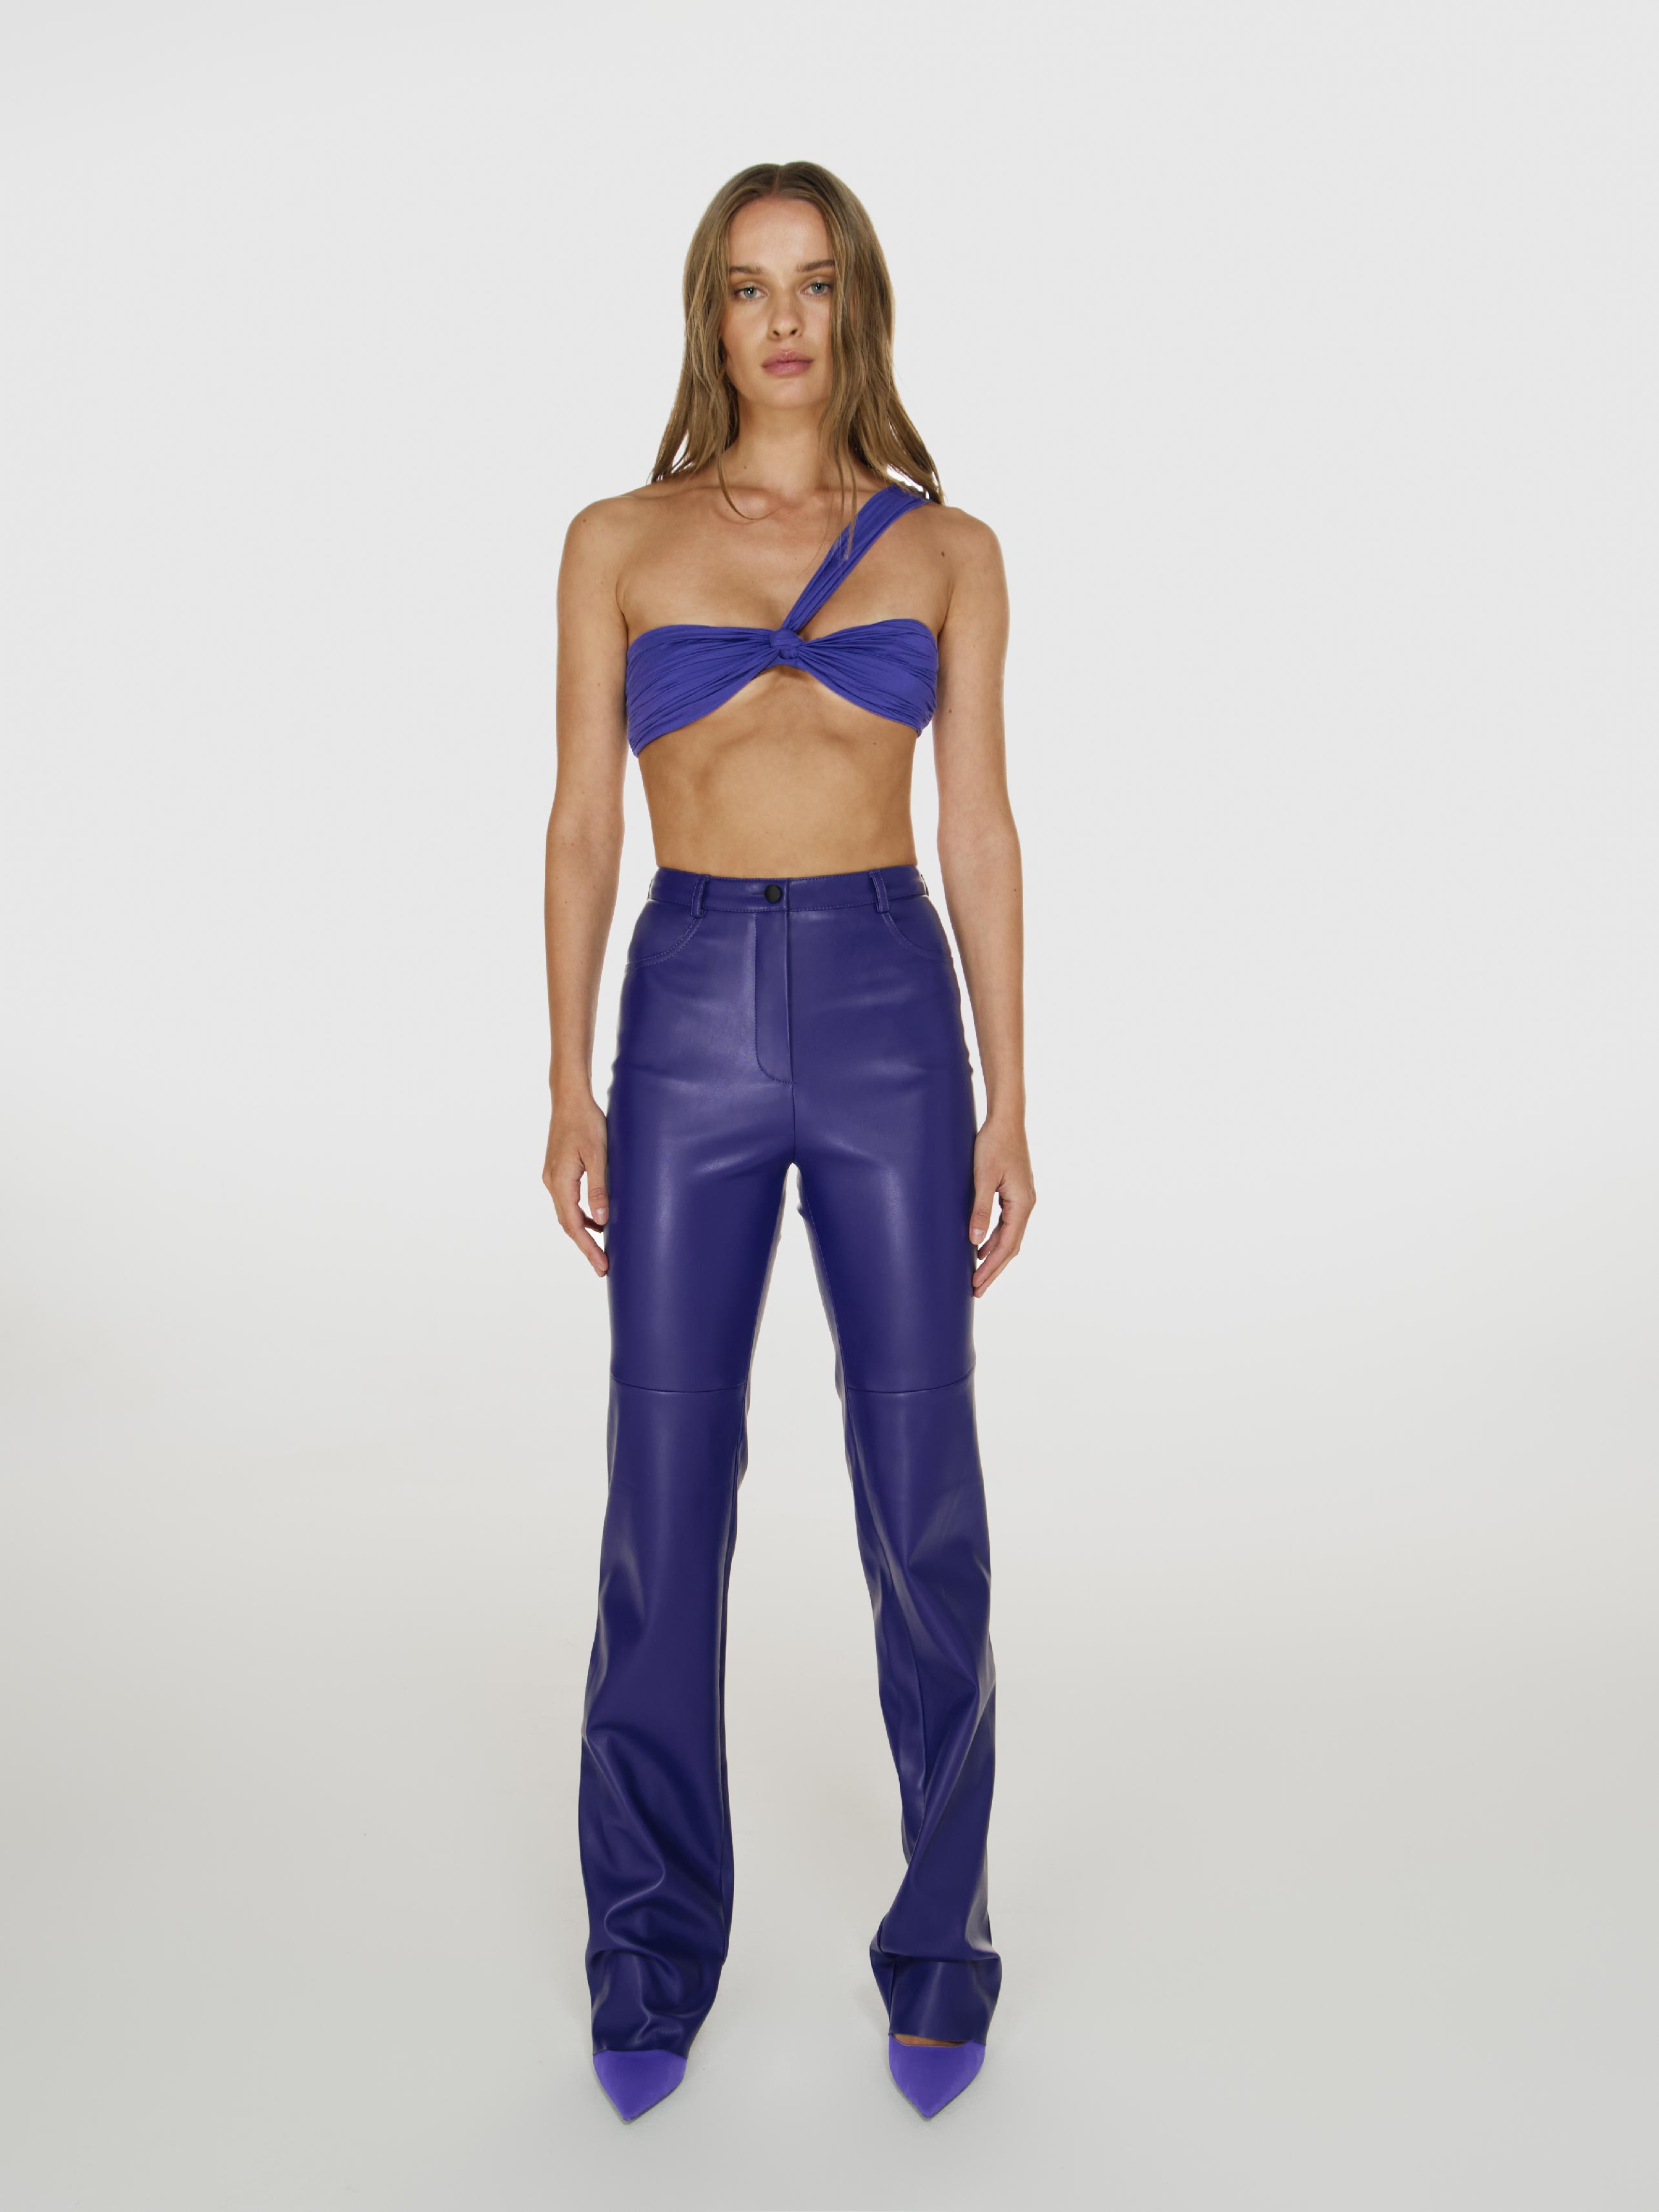 Full shot of a girl in a purple one shoulder crop top and purple vegan leather pants with straight leg